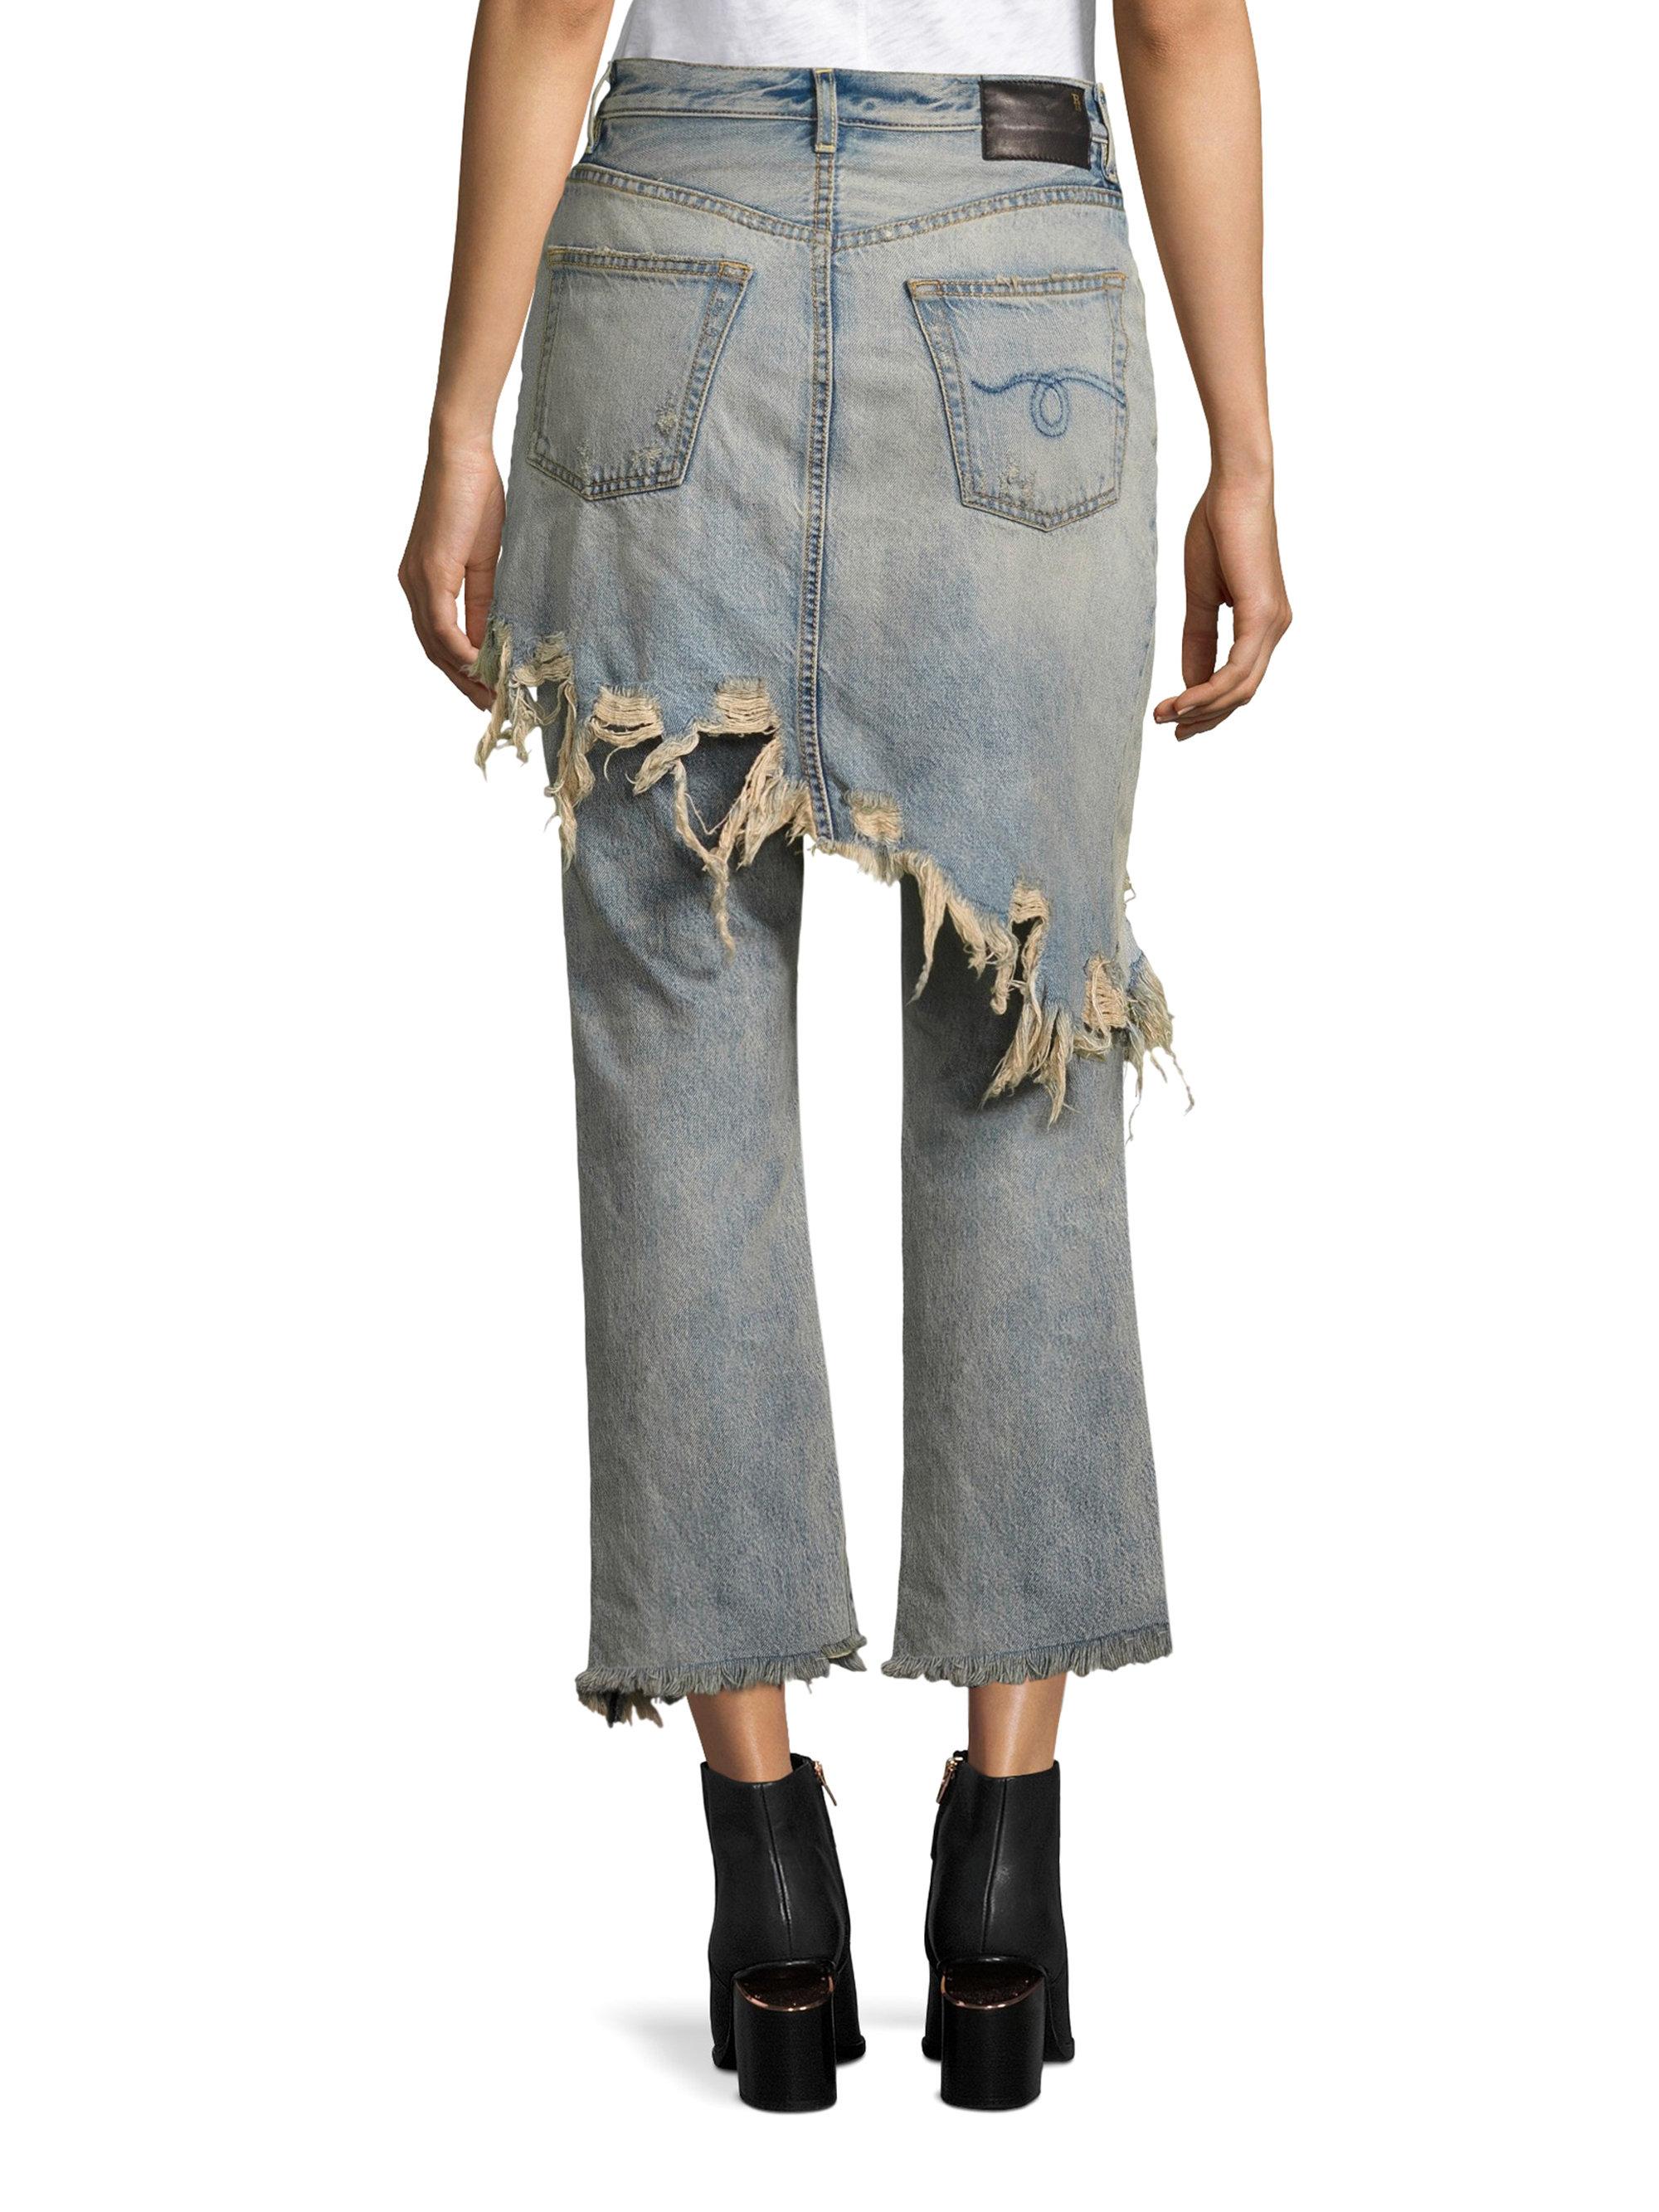 R13 Distressed Skirt Overlay Straight-leg Jeans in Blue - Lyst